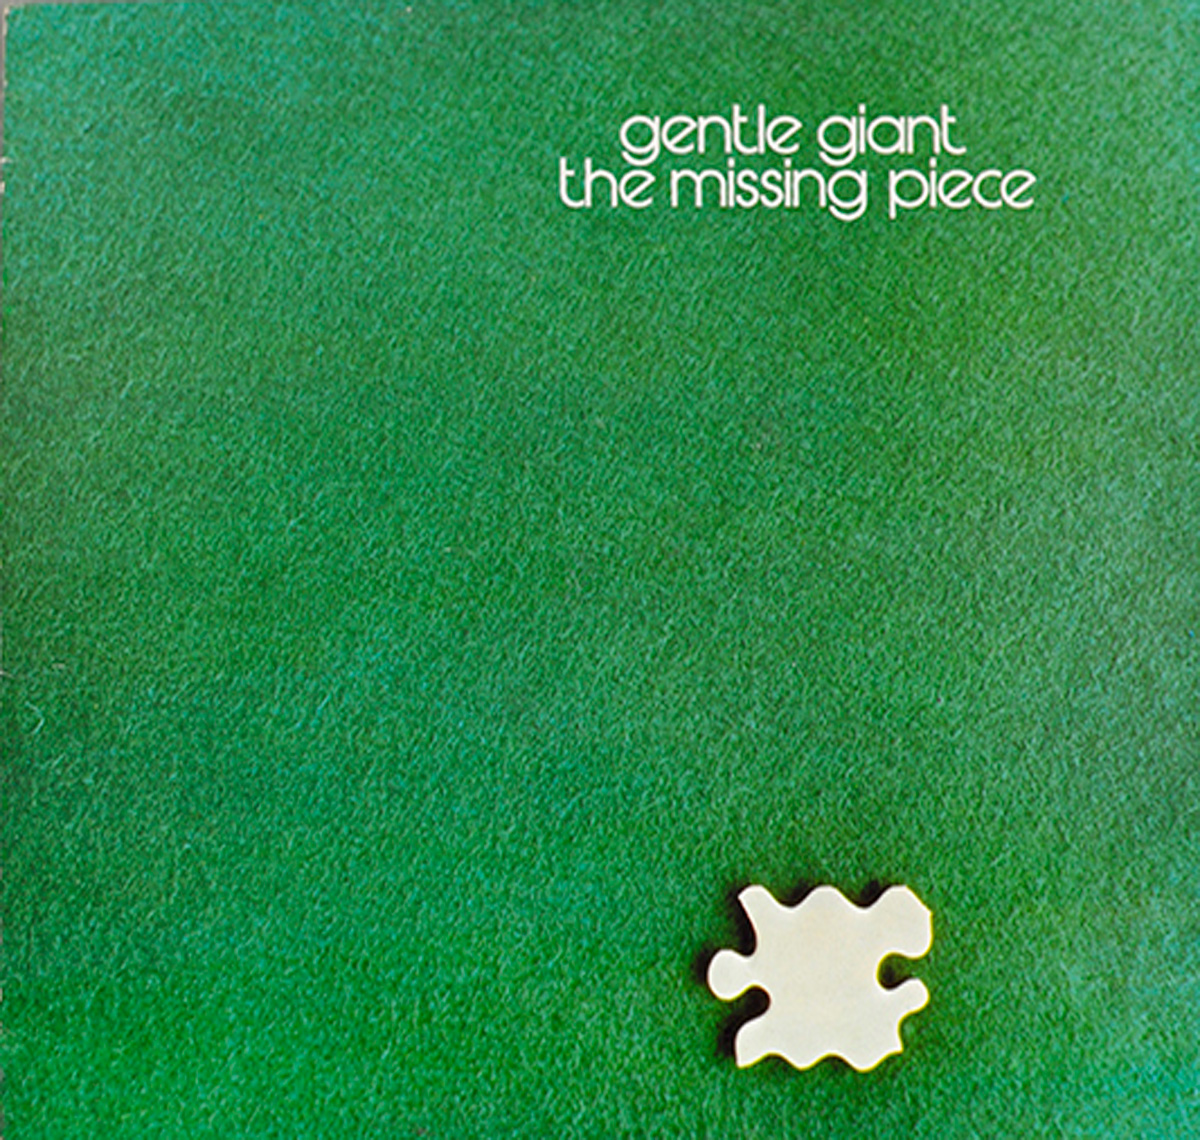 Front Cover Photo Of GENTLE GIANT - Missing Piece UK PrESSinG 12" LP VINYL 